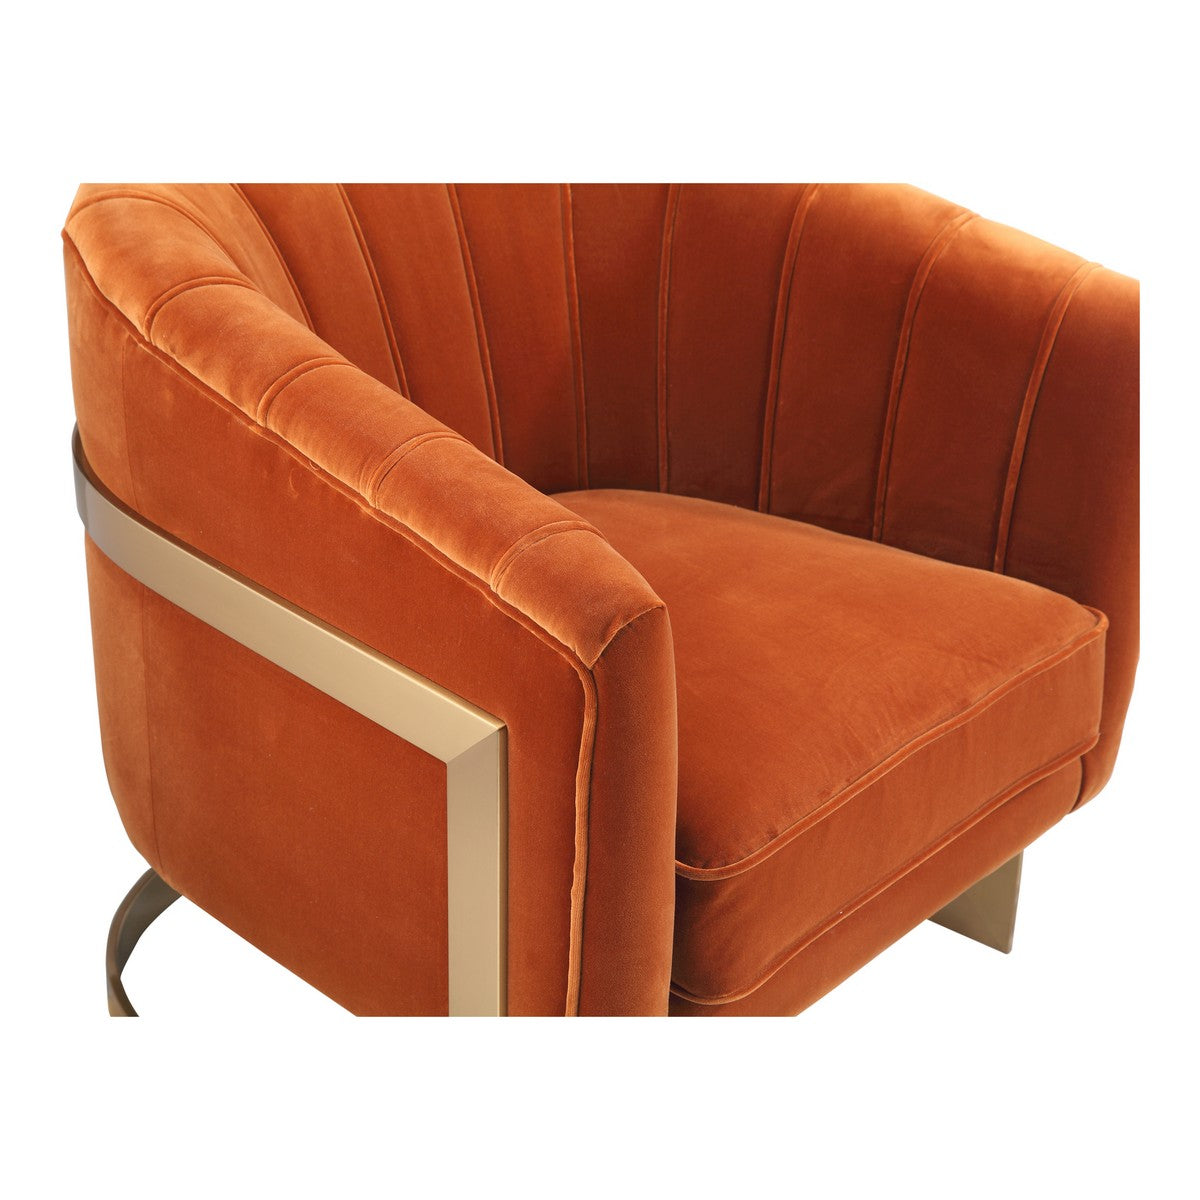 Moe's Home Collection Carr Arm Chair Orange - ME-1044-12